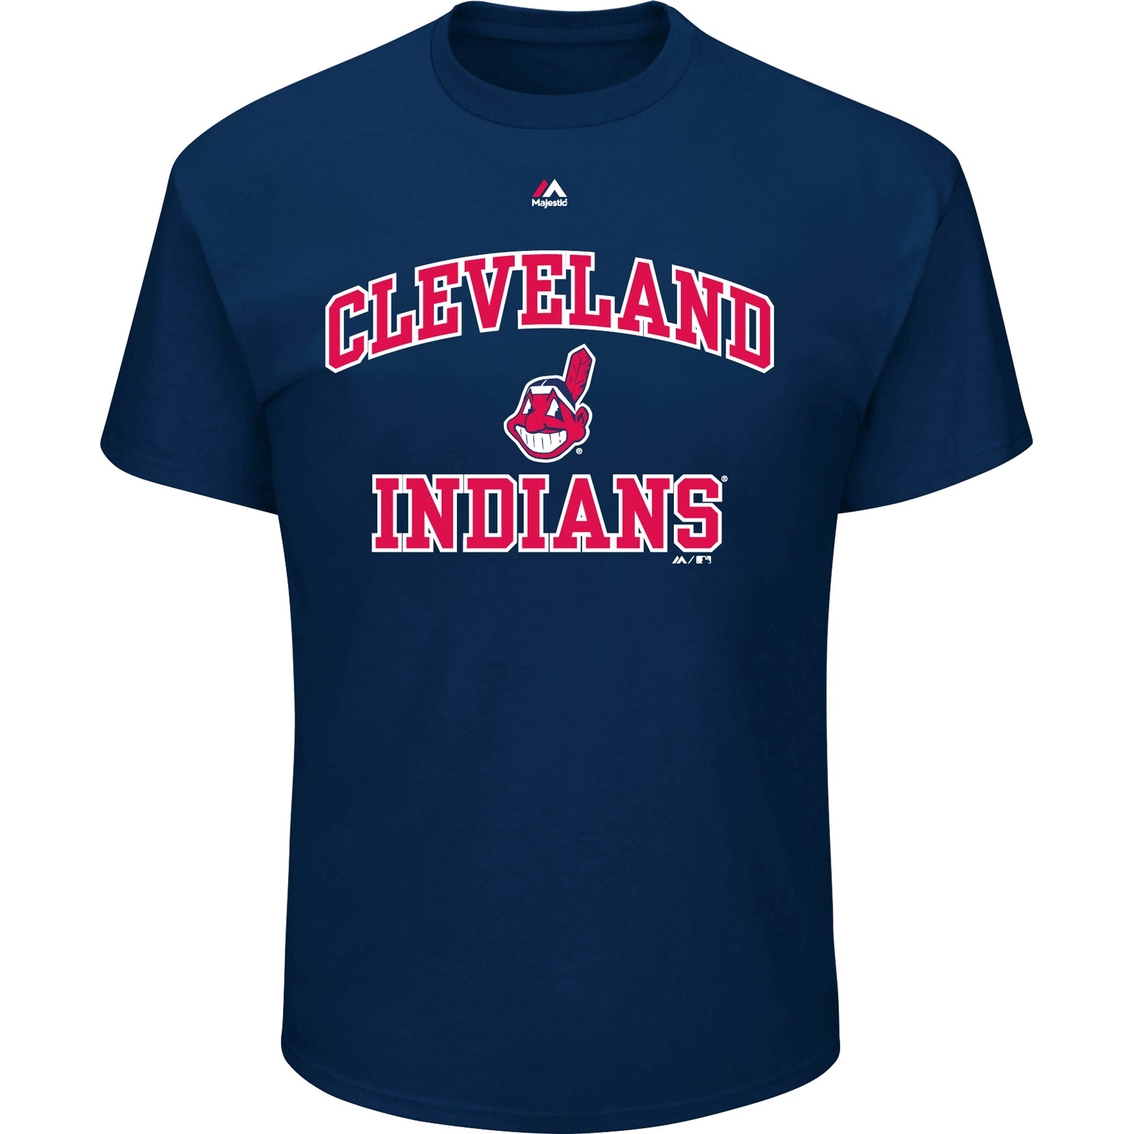 Majestic Athletic MLB Cleveland Indians Heart and Soul Tee - Image 2 of 3